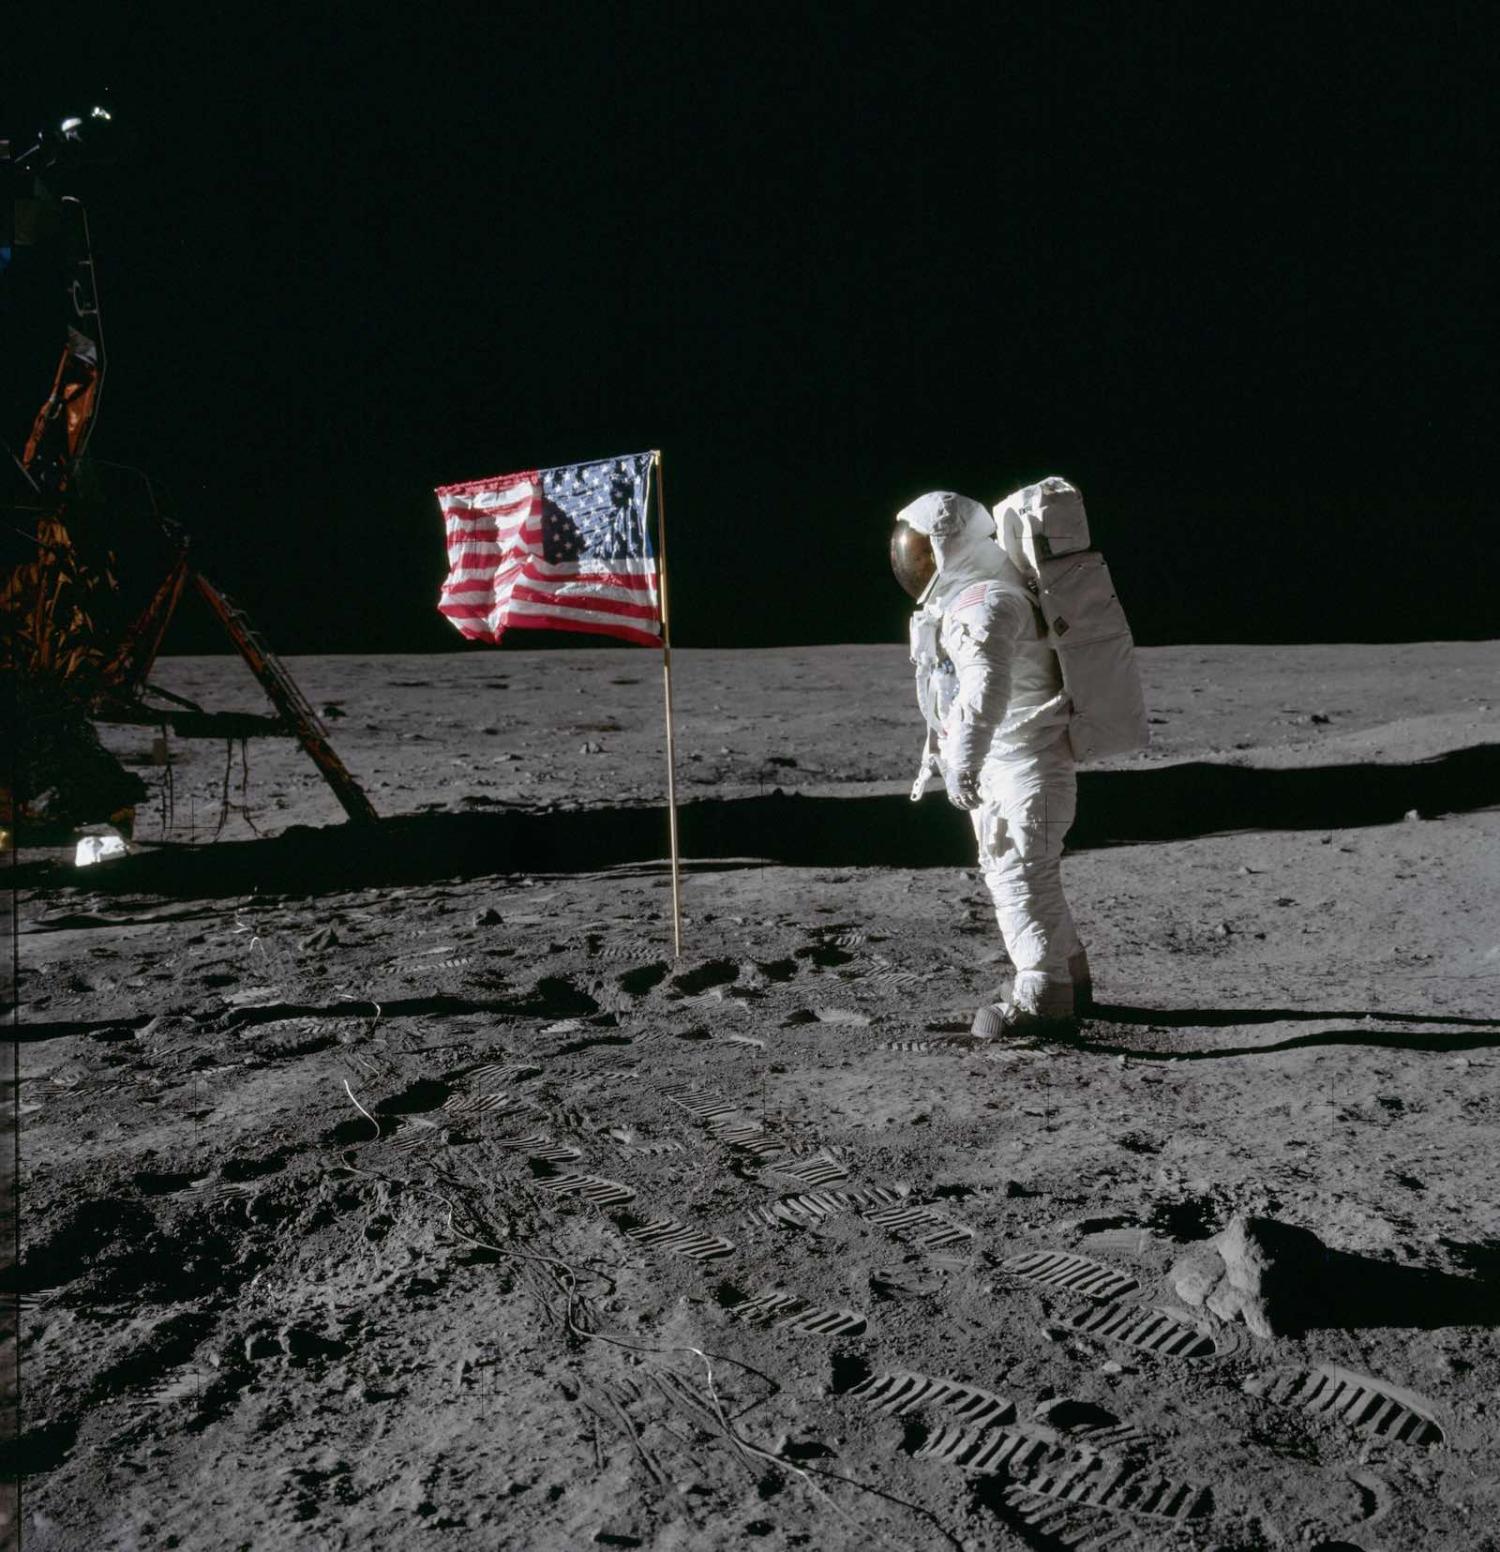 Astronaut Edwin "Buzz" Aldrin poses for photograph beside US flag on the surface of the Moon in 1969 (Photo: NASA Johnson/Flickr)